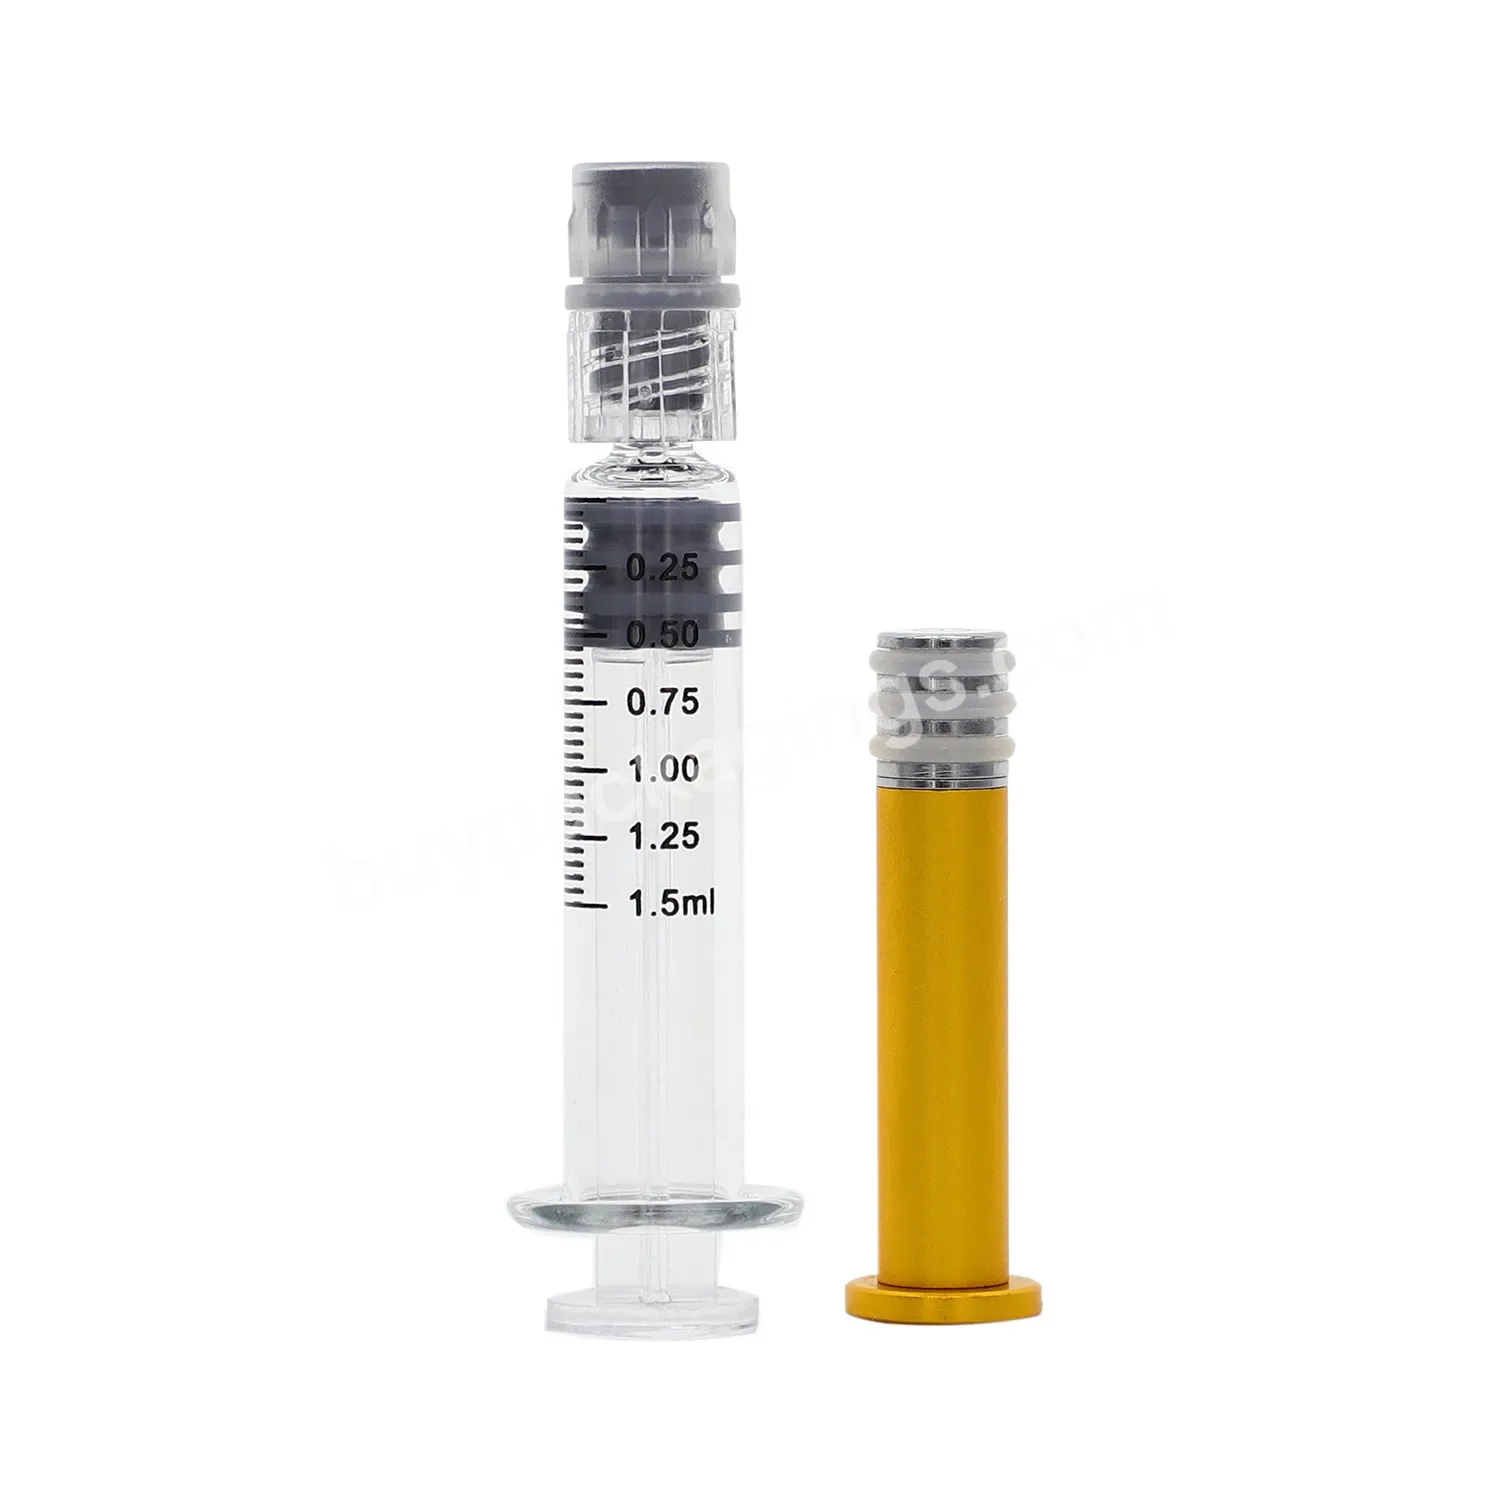 Factory Price For 1ml Glass Syringe Dust Free Oil Filled 1ml 2.25ml 3ml 5ml 10ml Disposable Glass Syringes With Luer Lock